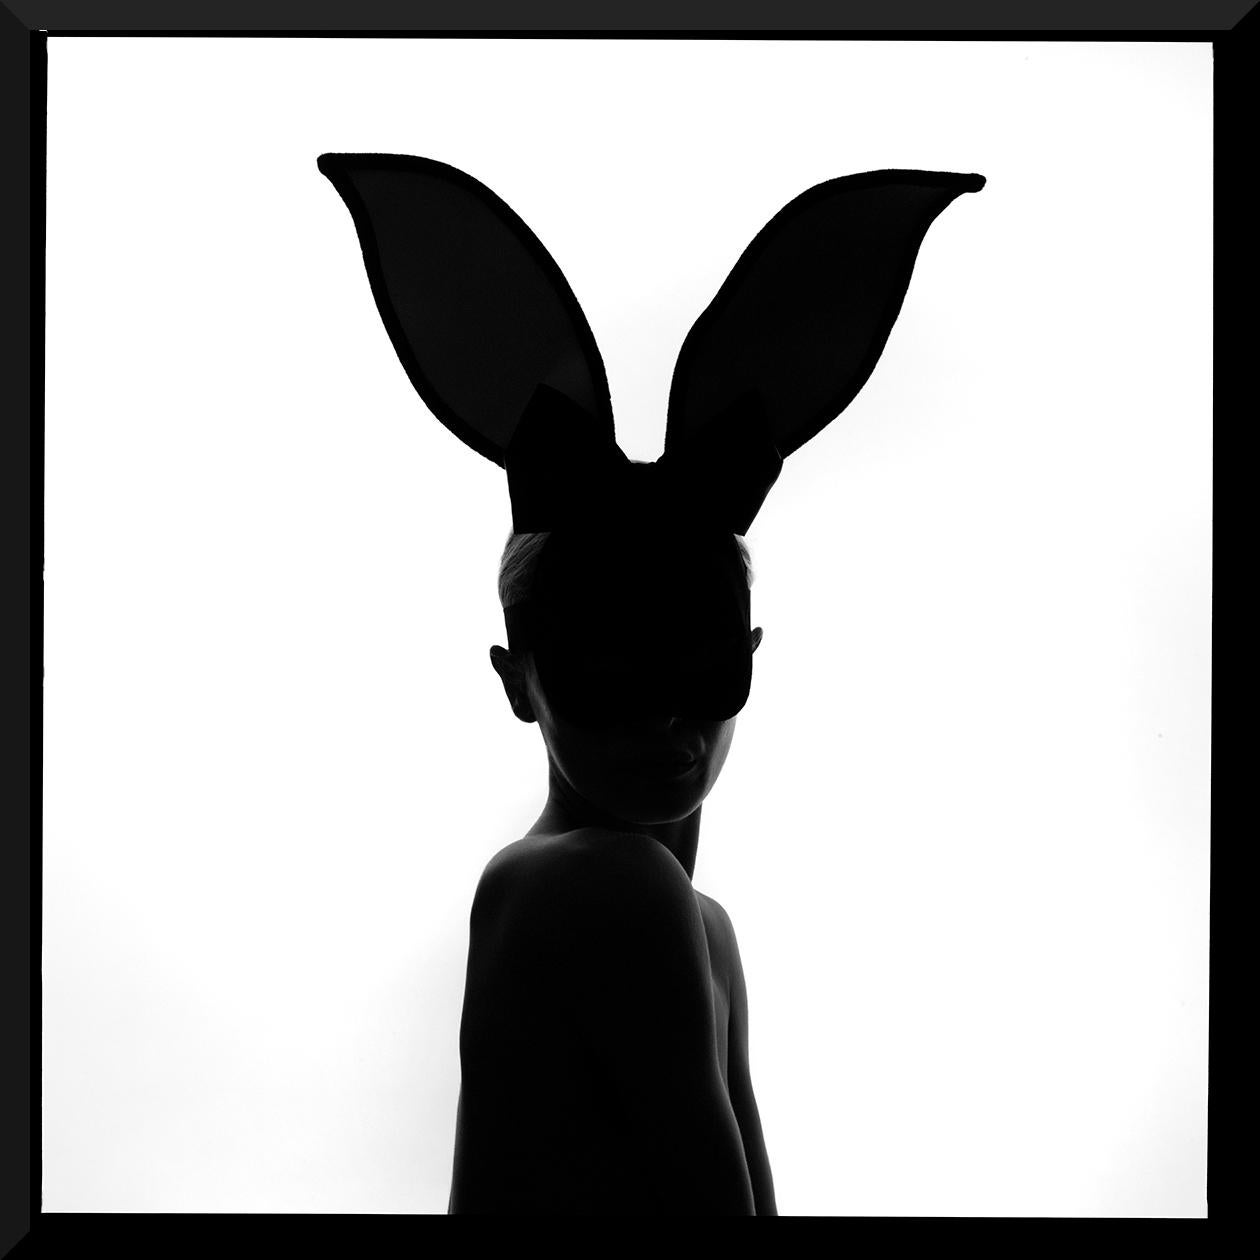 Size: 45 x 45 in. Edition of 3

Tyler Shields has made a name for himself as one of the most celebrated fine art photographers. But before the world knew Shields as the photo provocateur that he is today, he seemingly lived a life as complex and